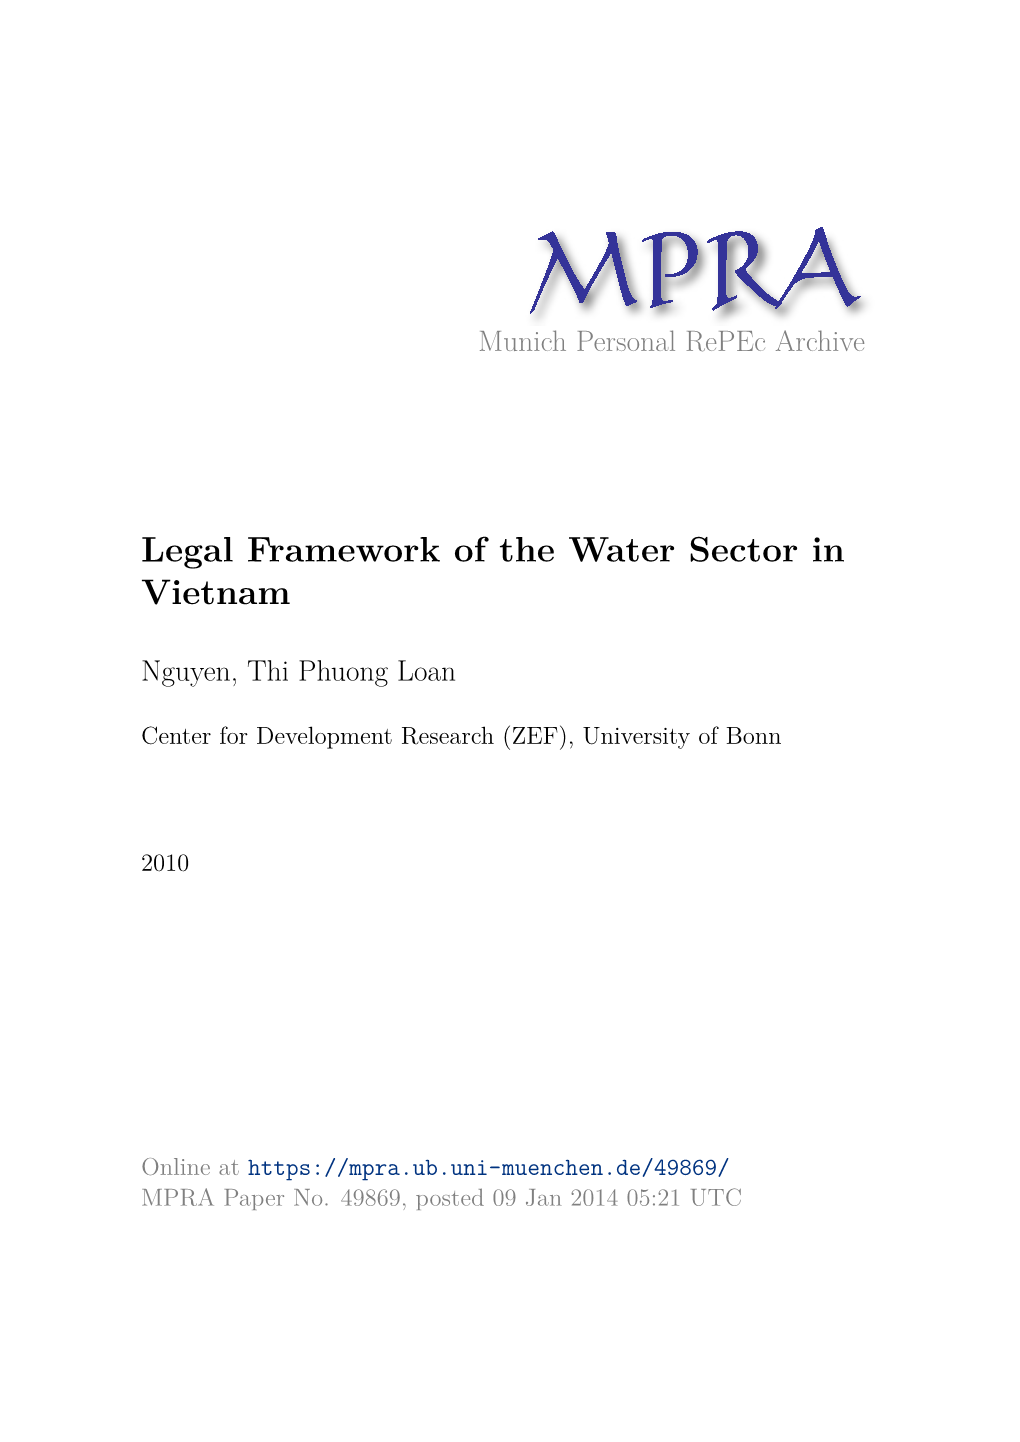 Legal Framework of the Water Sector in Vietnam